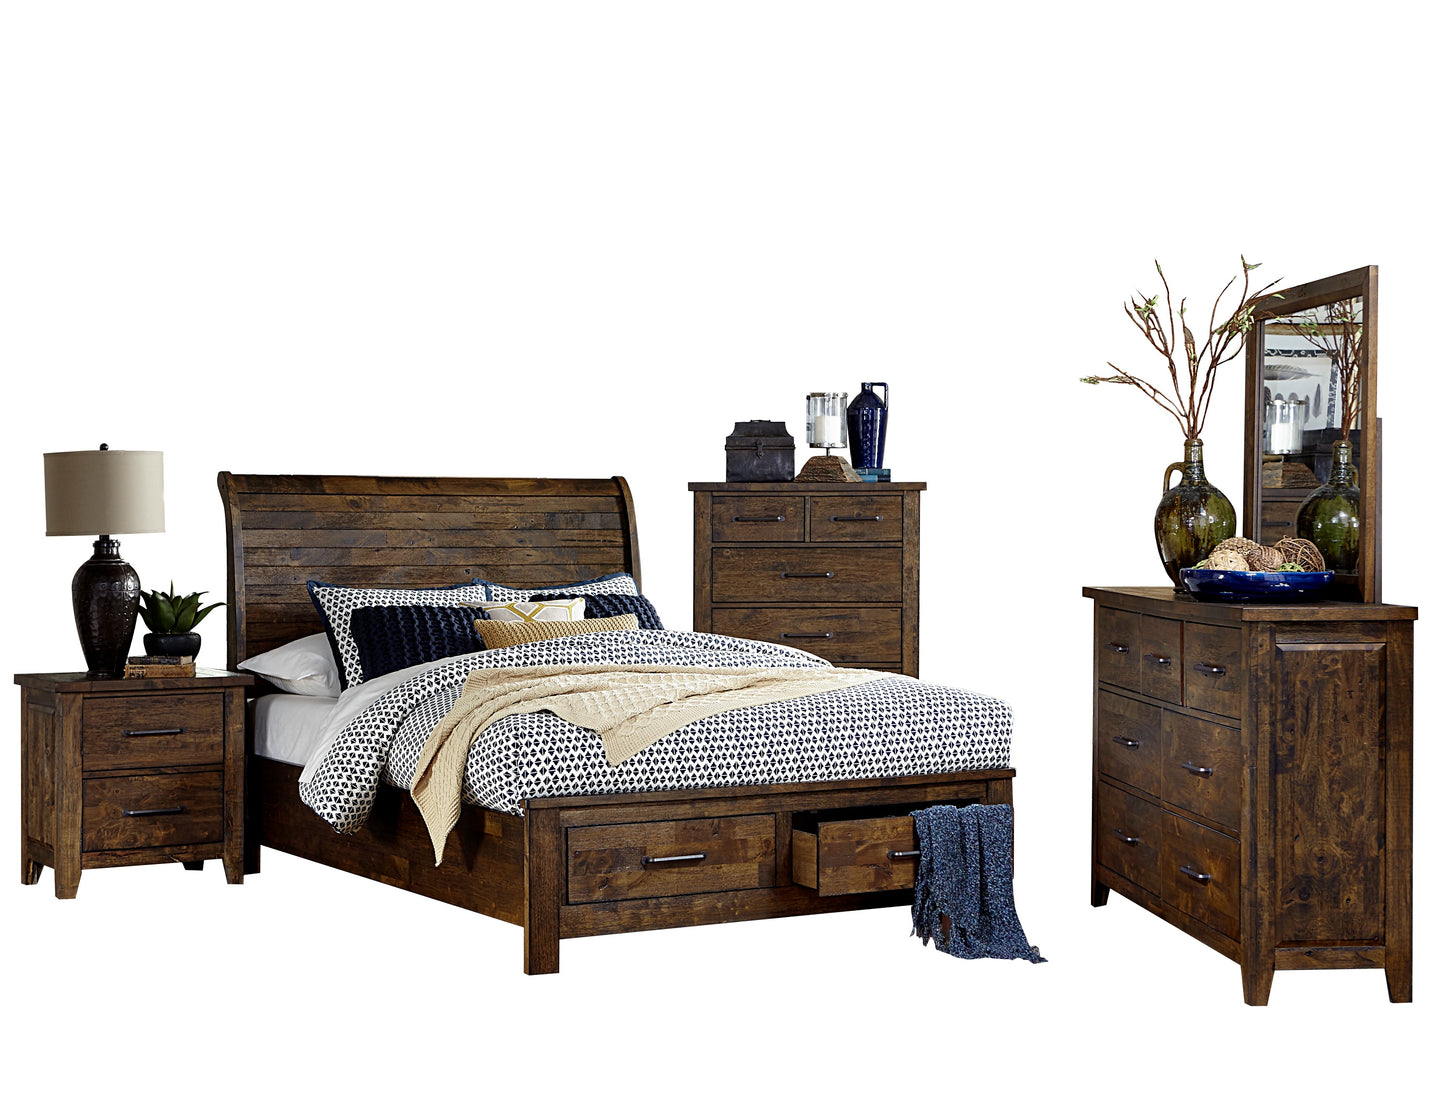 Jacoby Rustic 5PC Bedroom Set Cal King Sleigh Storage Bed, Dresser, Mirror, Nightstand, Chest in Country Brown